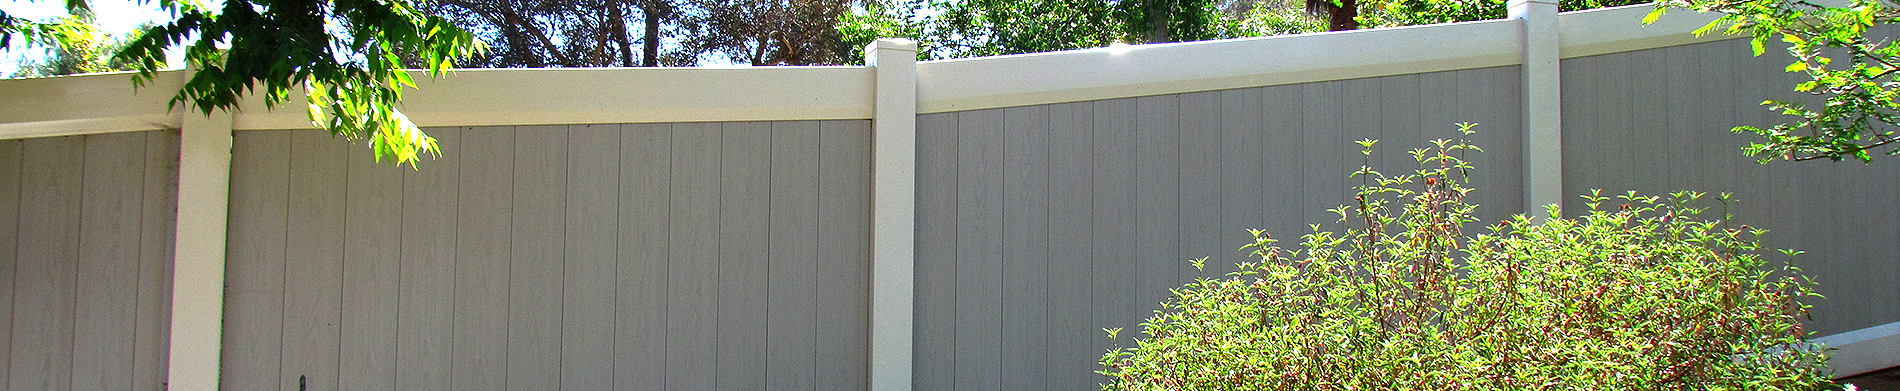 Install Strong and Durable Vinyl Fences Around Your Property